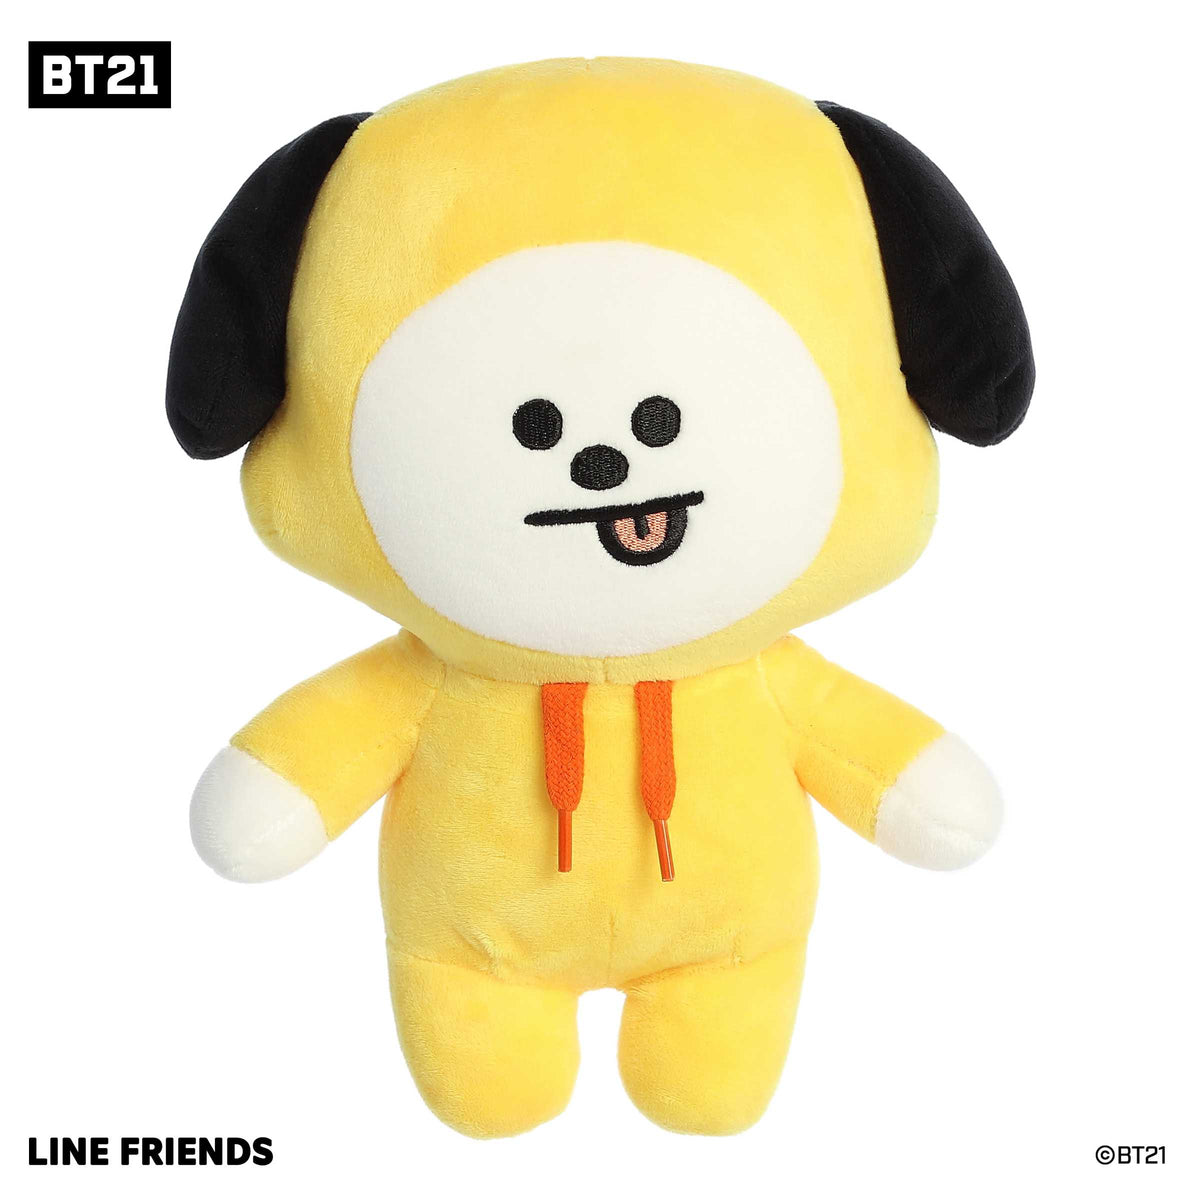 CHIMMY Plush in signature sunny yellow, featuring black ears and a goofy expression